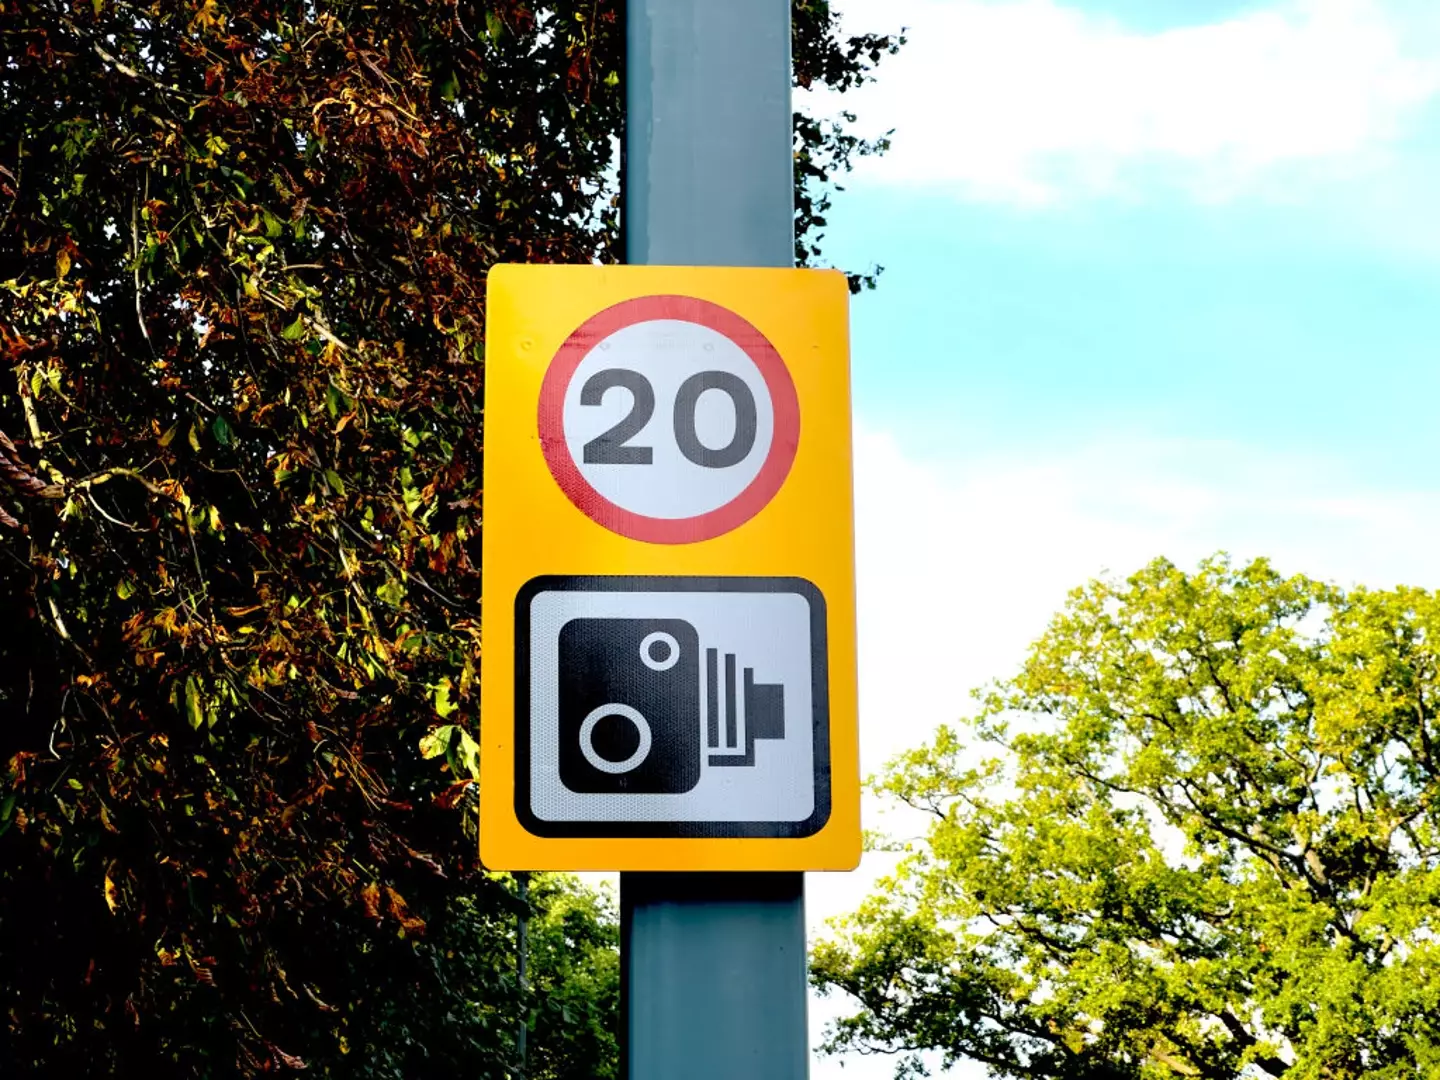 New laws set to be introduced next week will see mandatory speed limiters fitted to all new cars made in Europe. (Peter Dazeley/Getty Images)